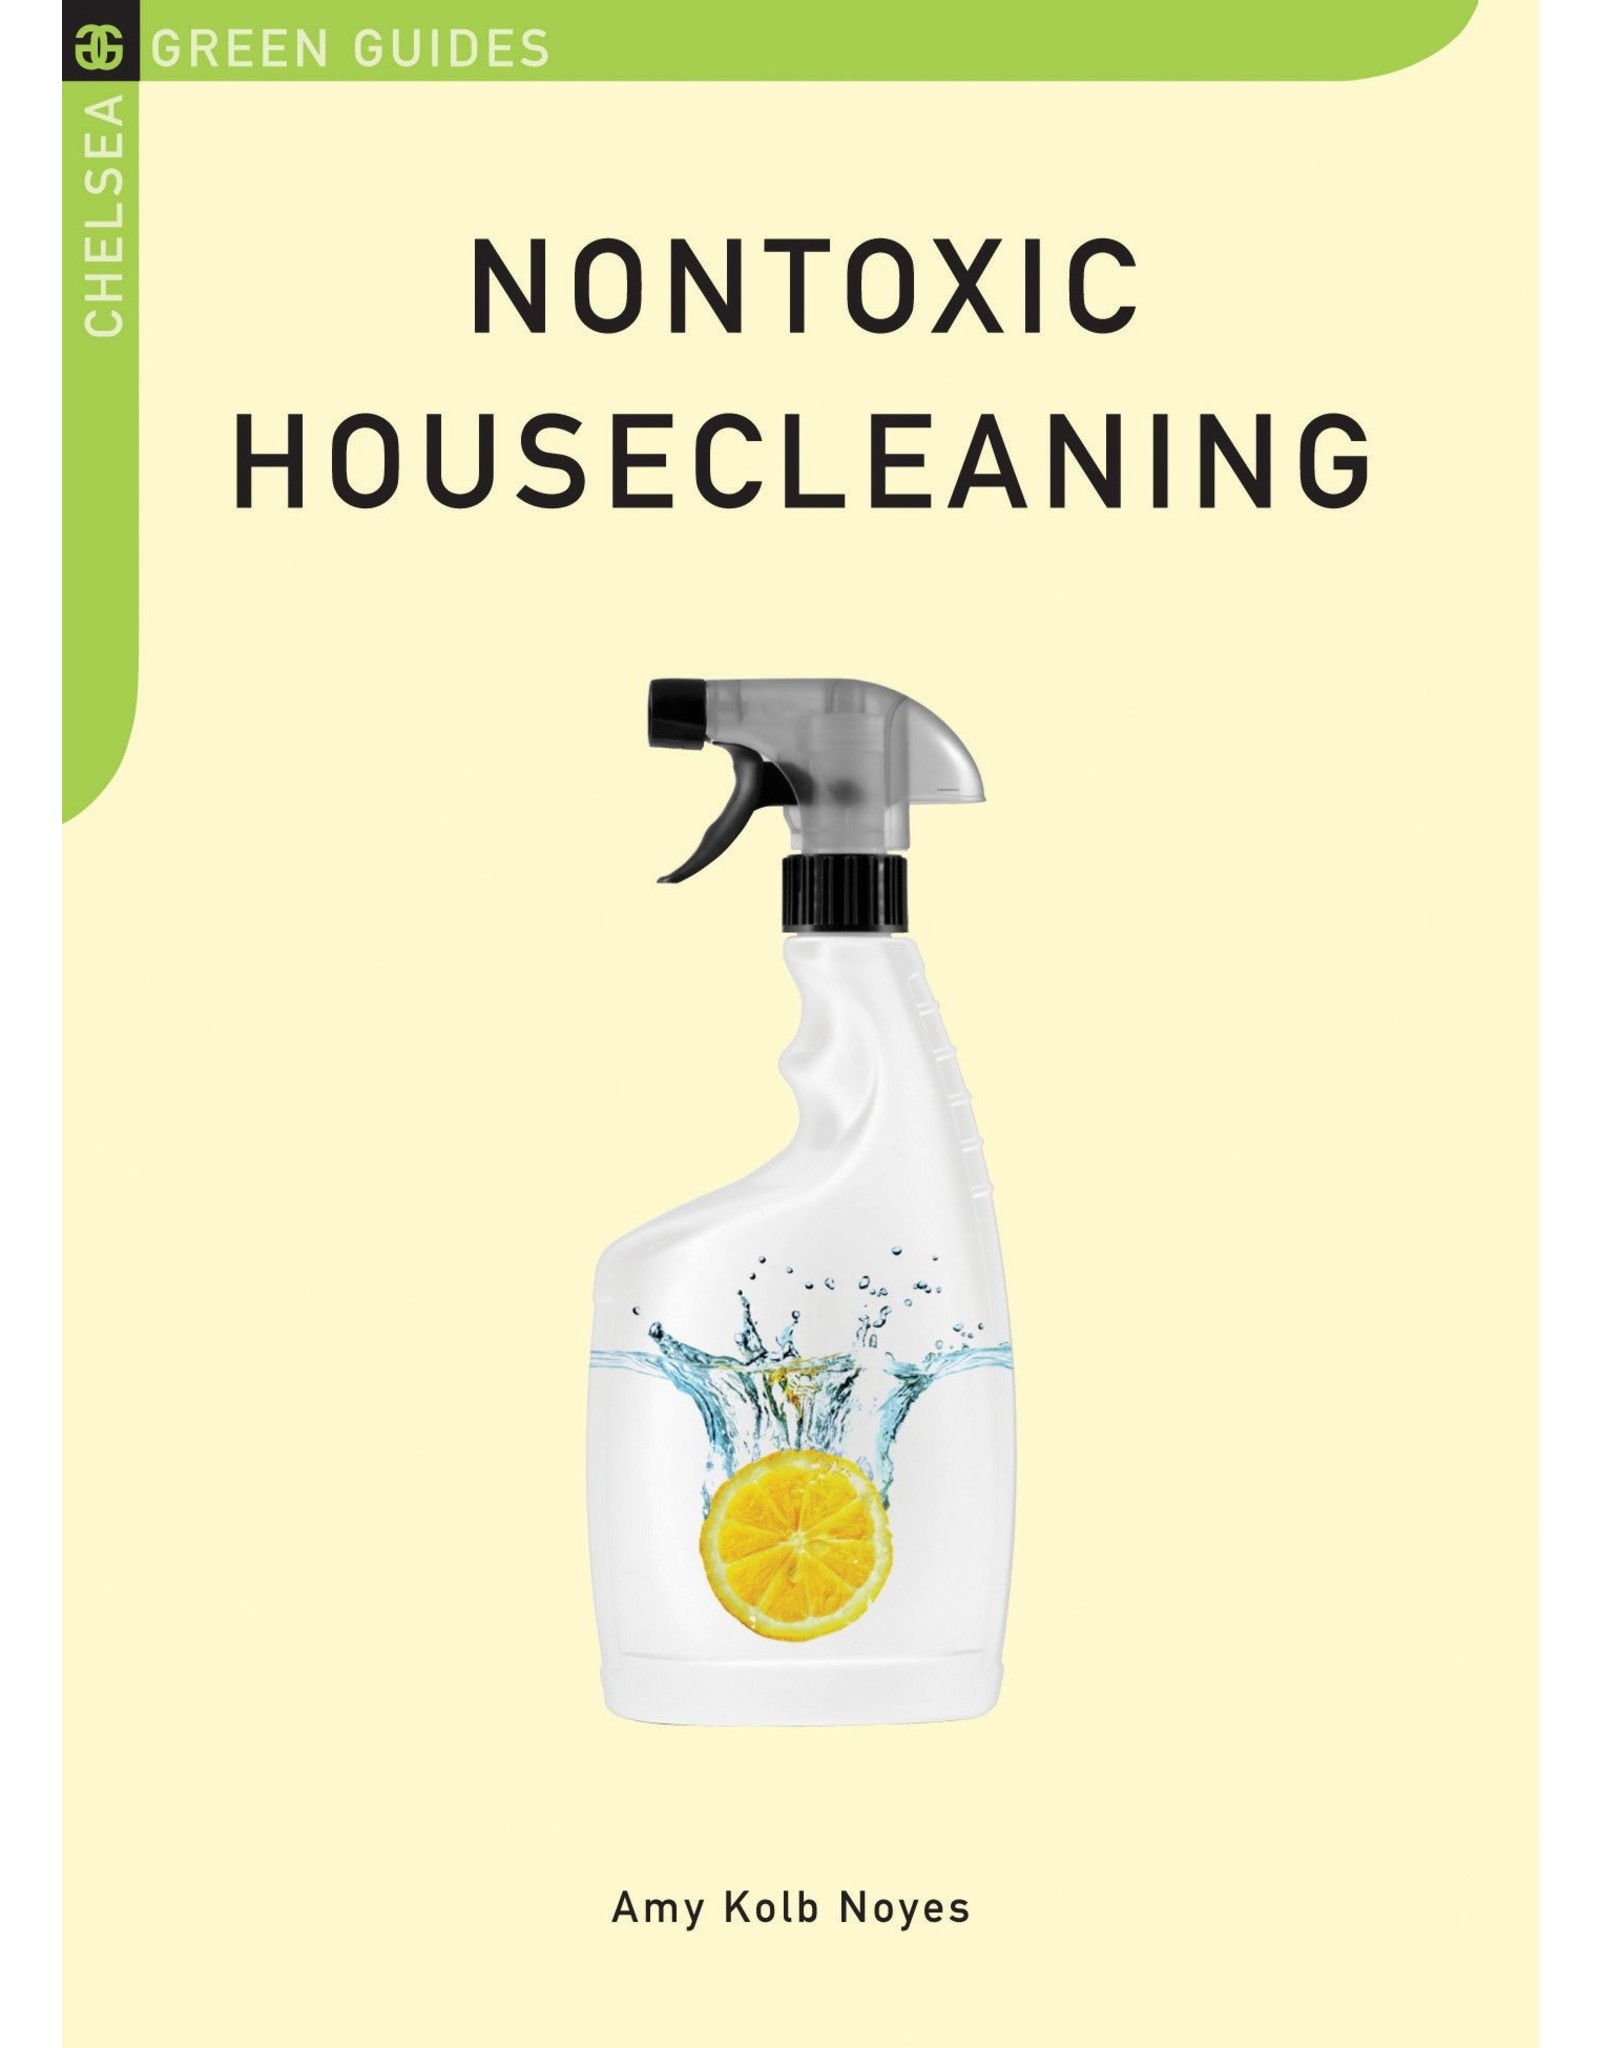 Literature Nontoxic Housecleaning